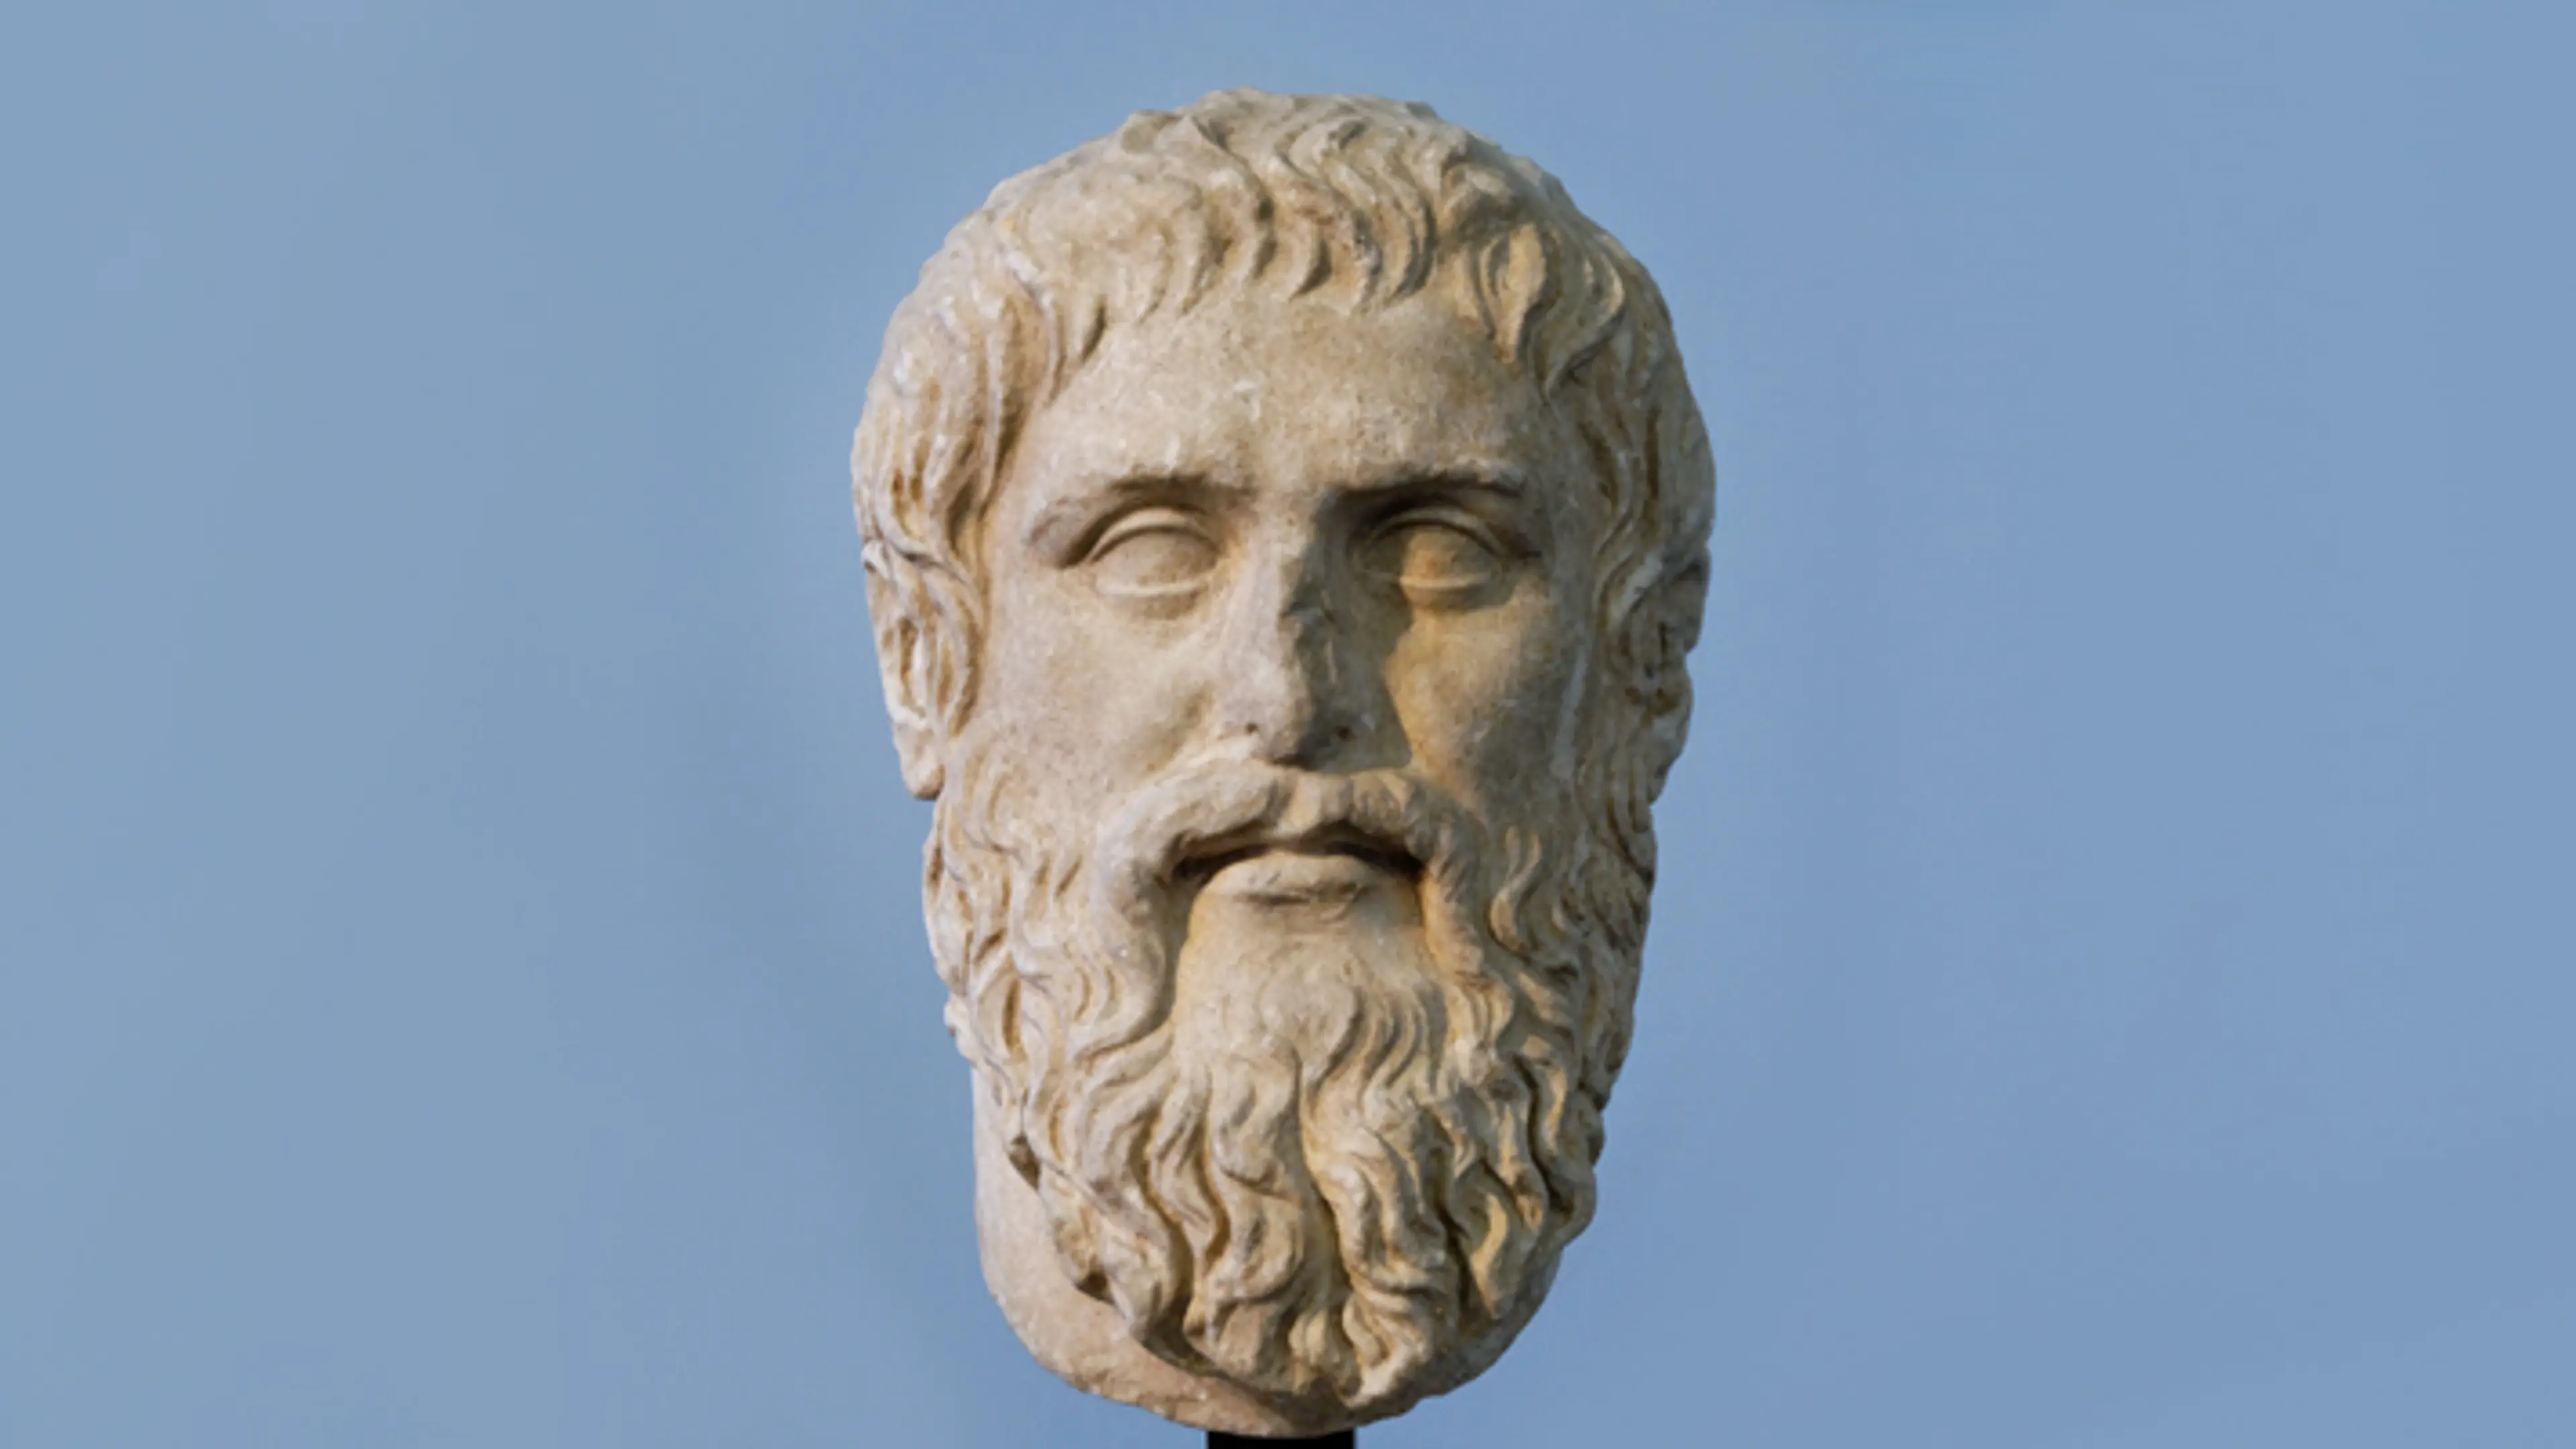 29 quotes from Plato, the Father of Western philosophy